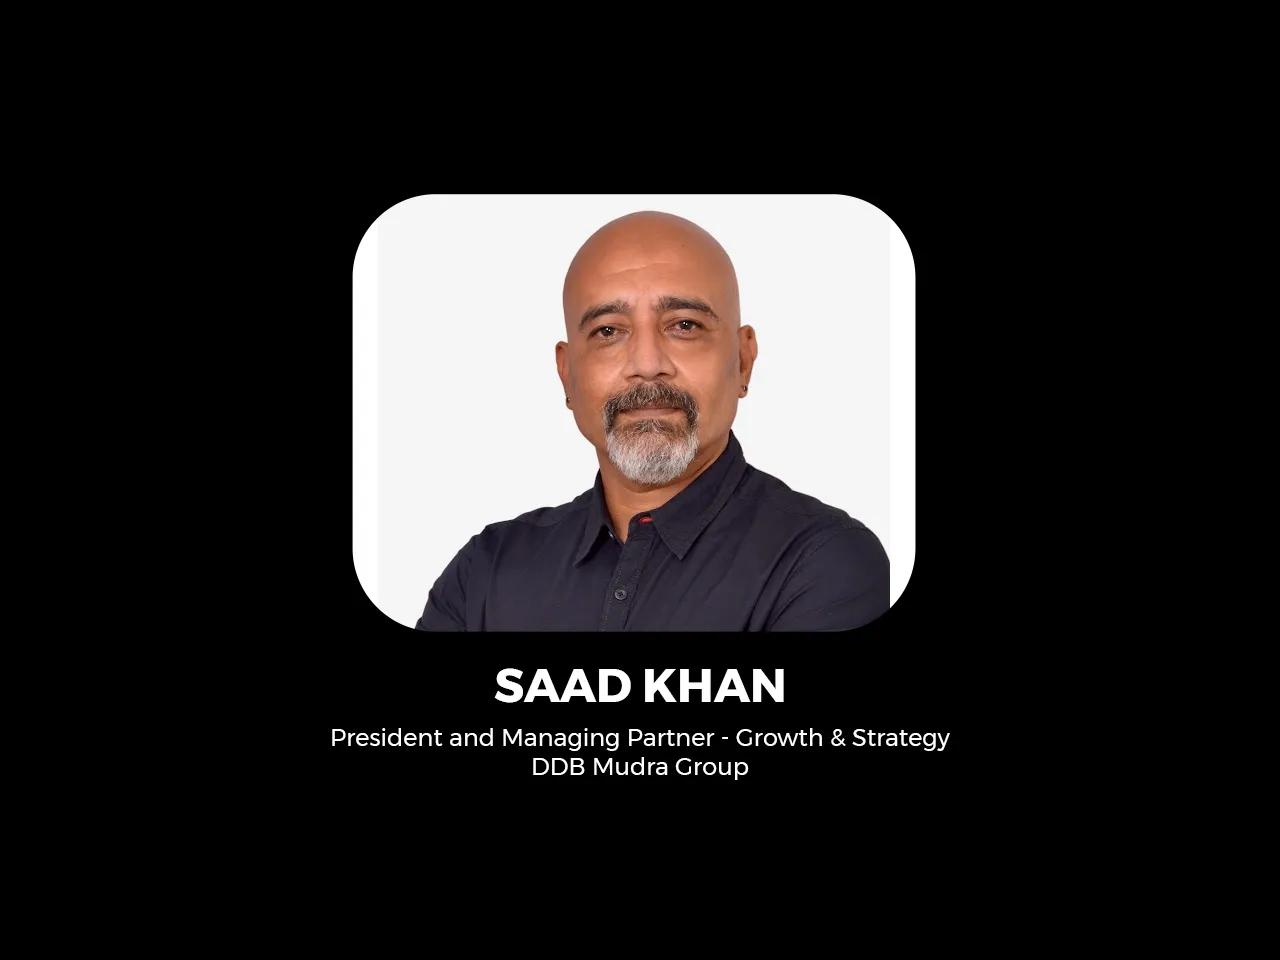 The real opportunity lies in embracing tech to create innovative solutions: Saad Khan, DDB Mudra Group